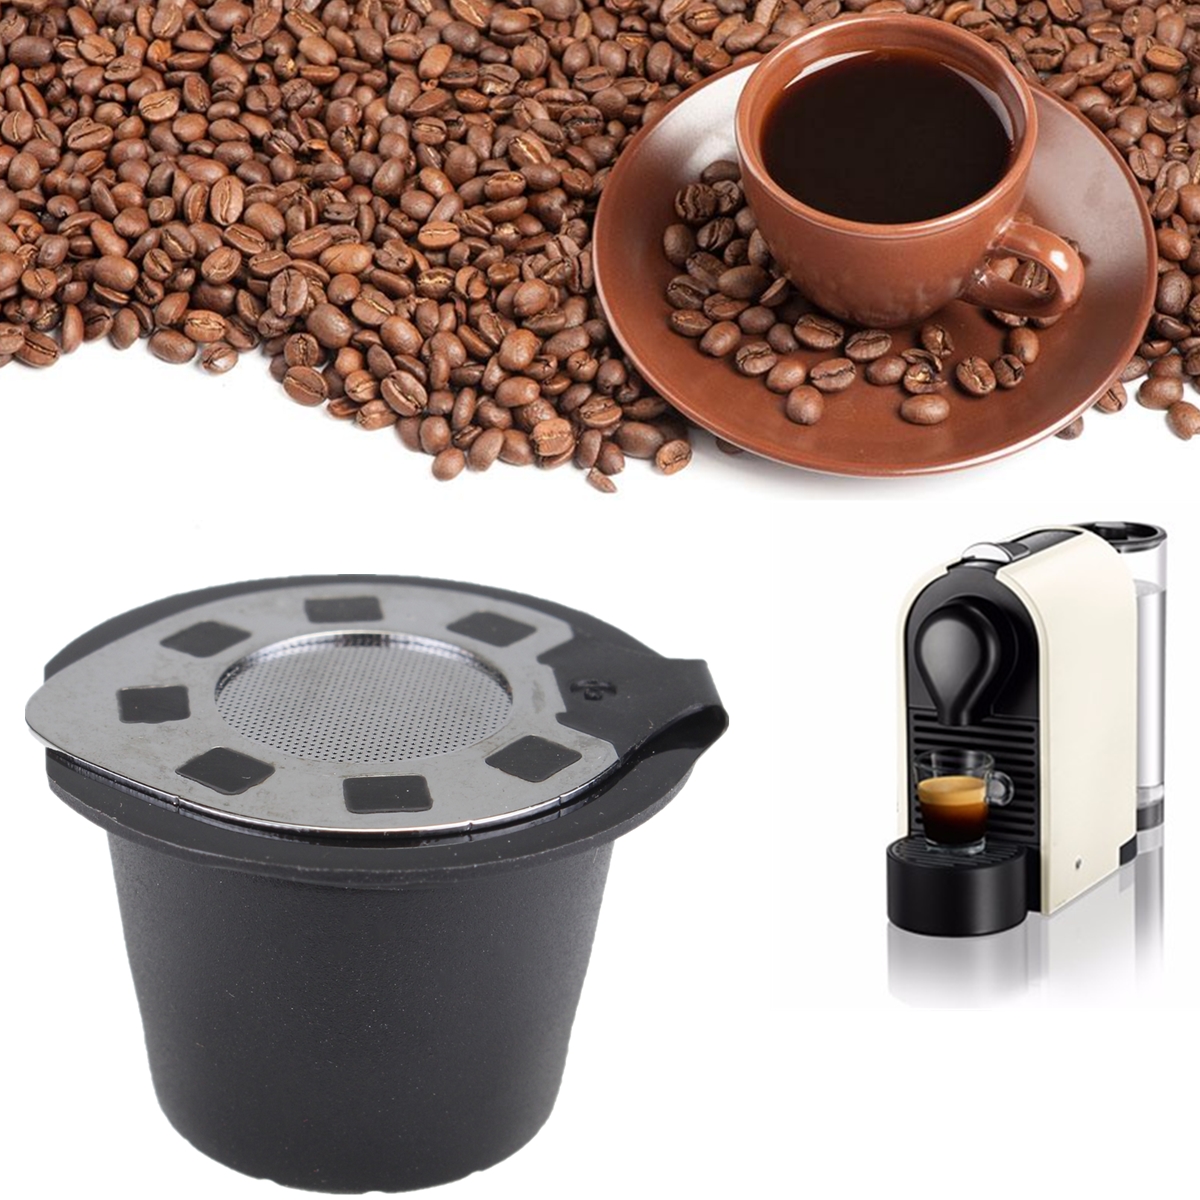 

Stainless Steel Refillable Reusable Coffee Capsule Cup Pod Filter Tool For Nespresso